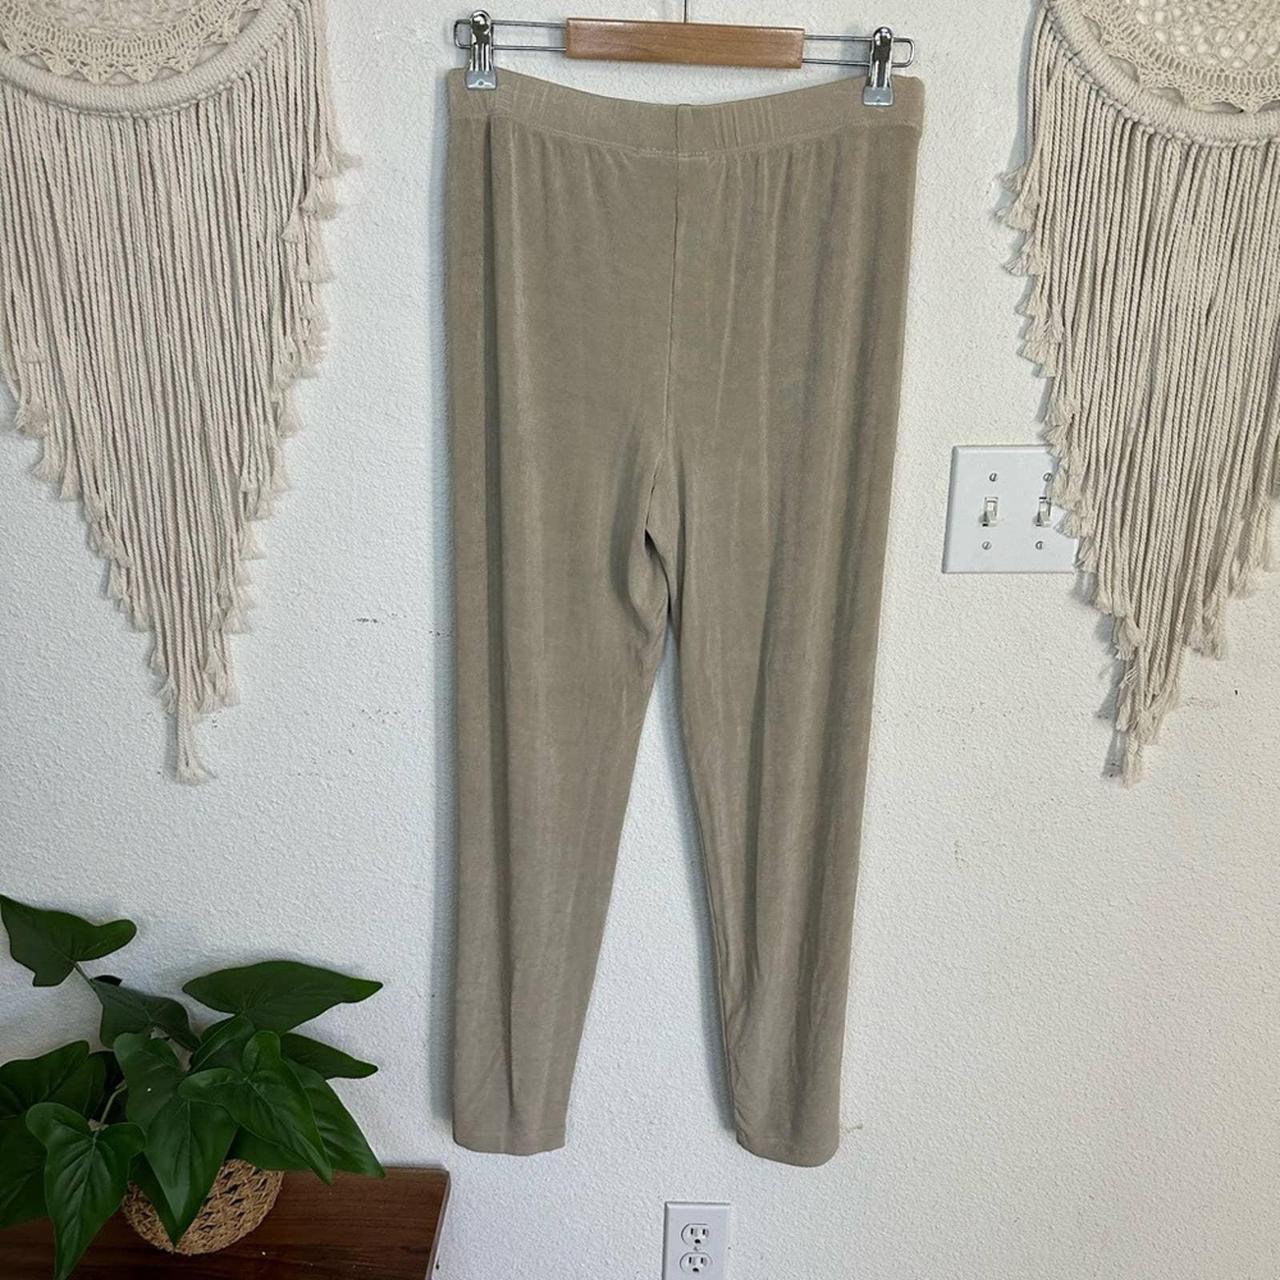 Chicos travelers tan slinky knit pull on pants size - Depop